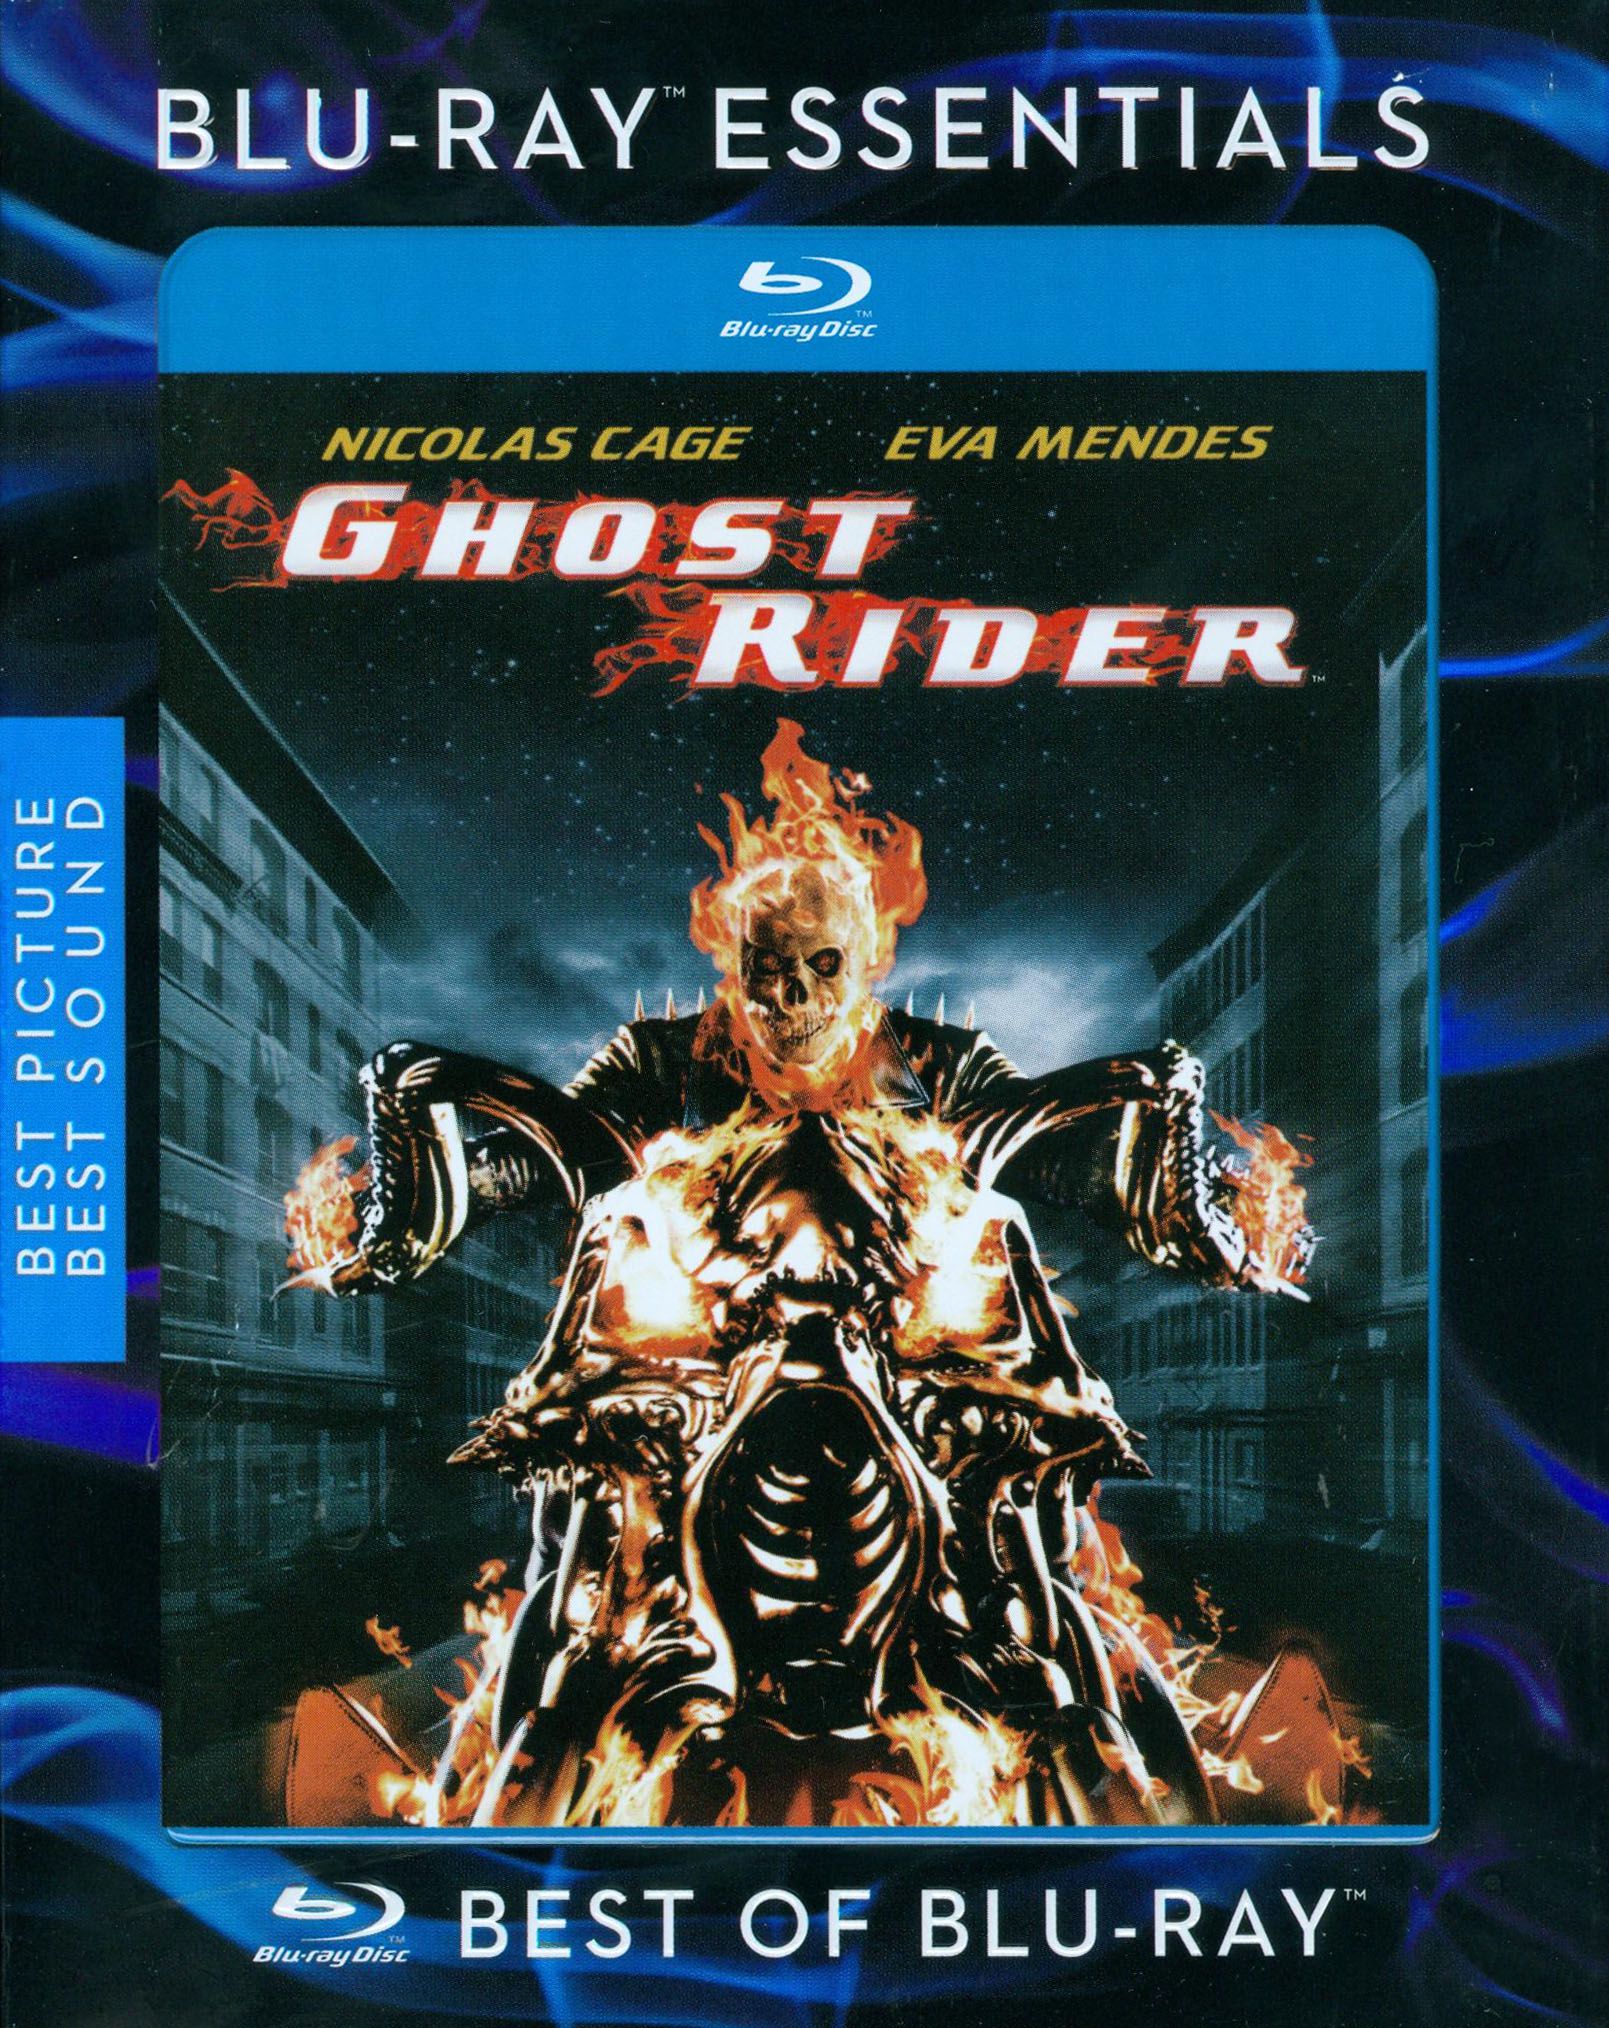 GHOST RIDER [2007] – Official Trailer (HD) 